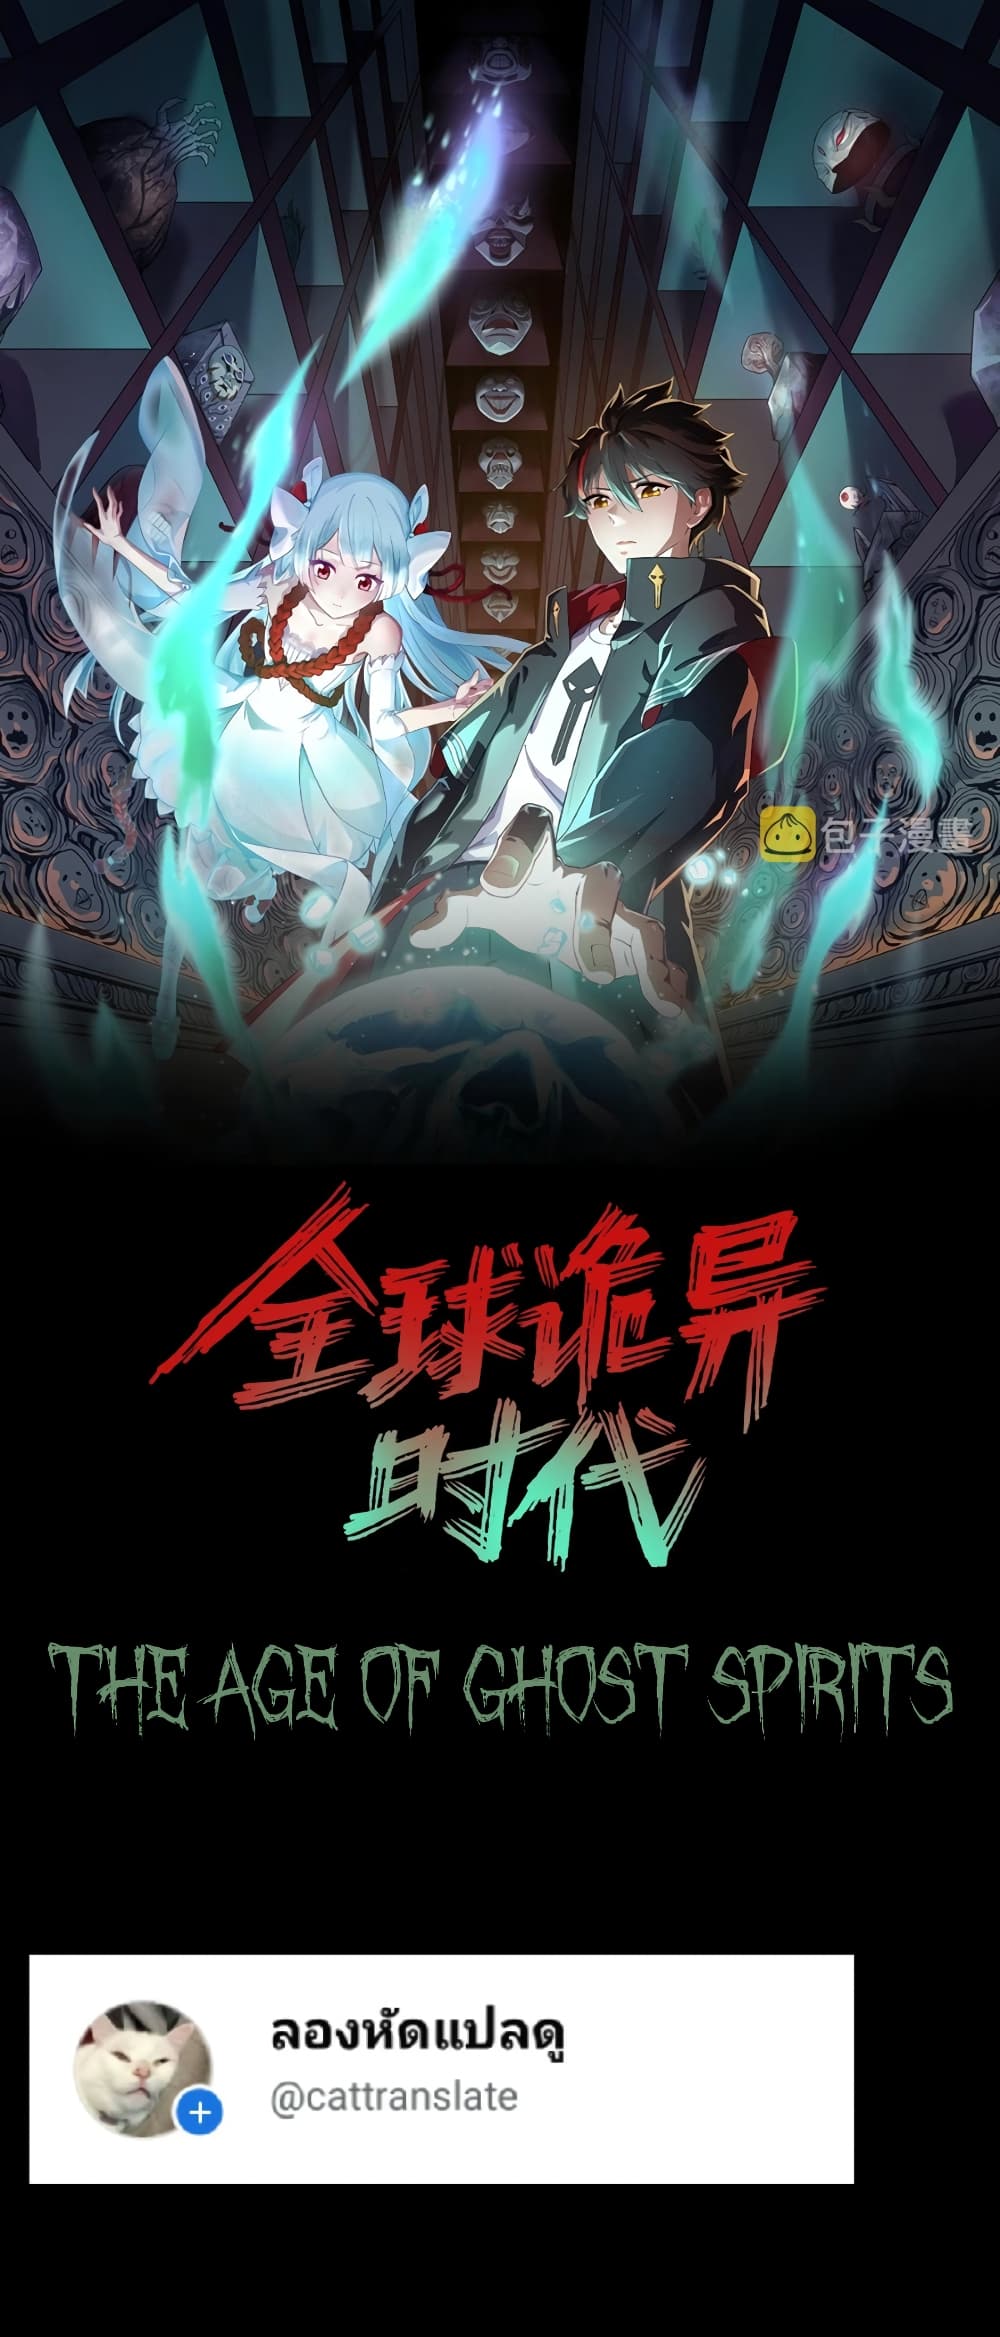 The Age of Ghost Spirits à¸à¸­à¸à¸à¸µà¹ 48 (1)